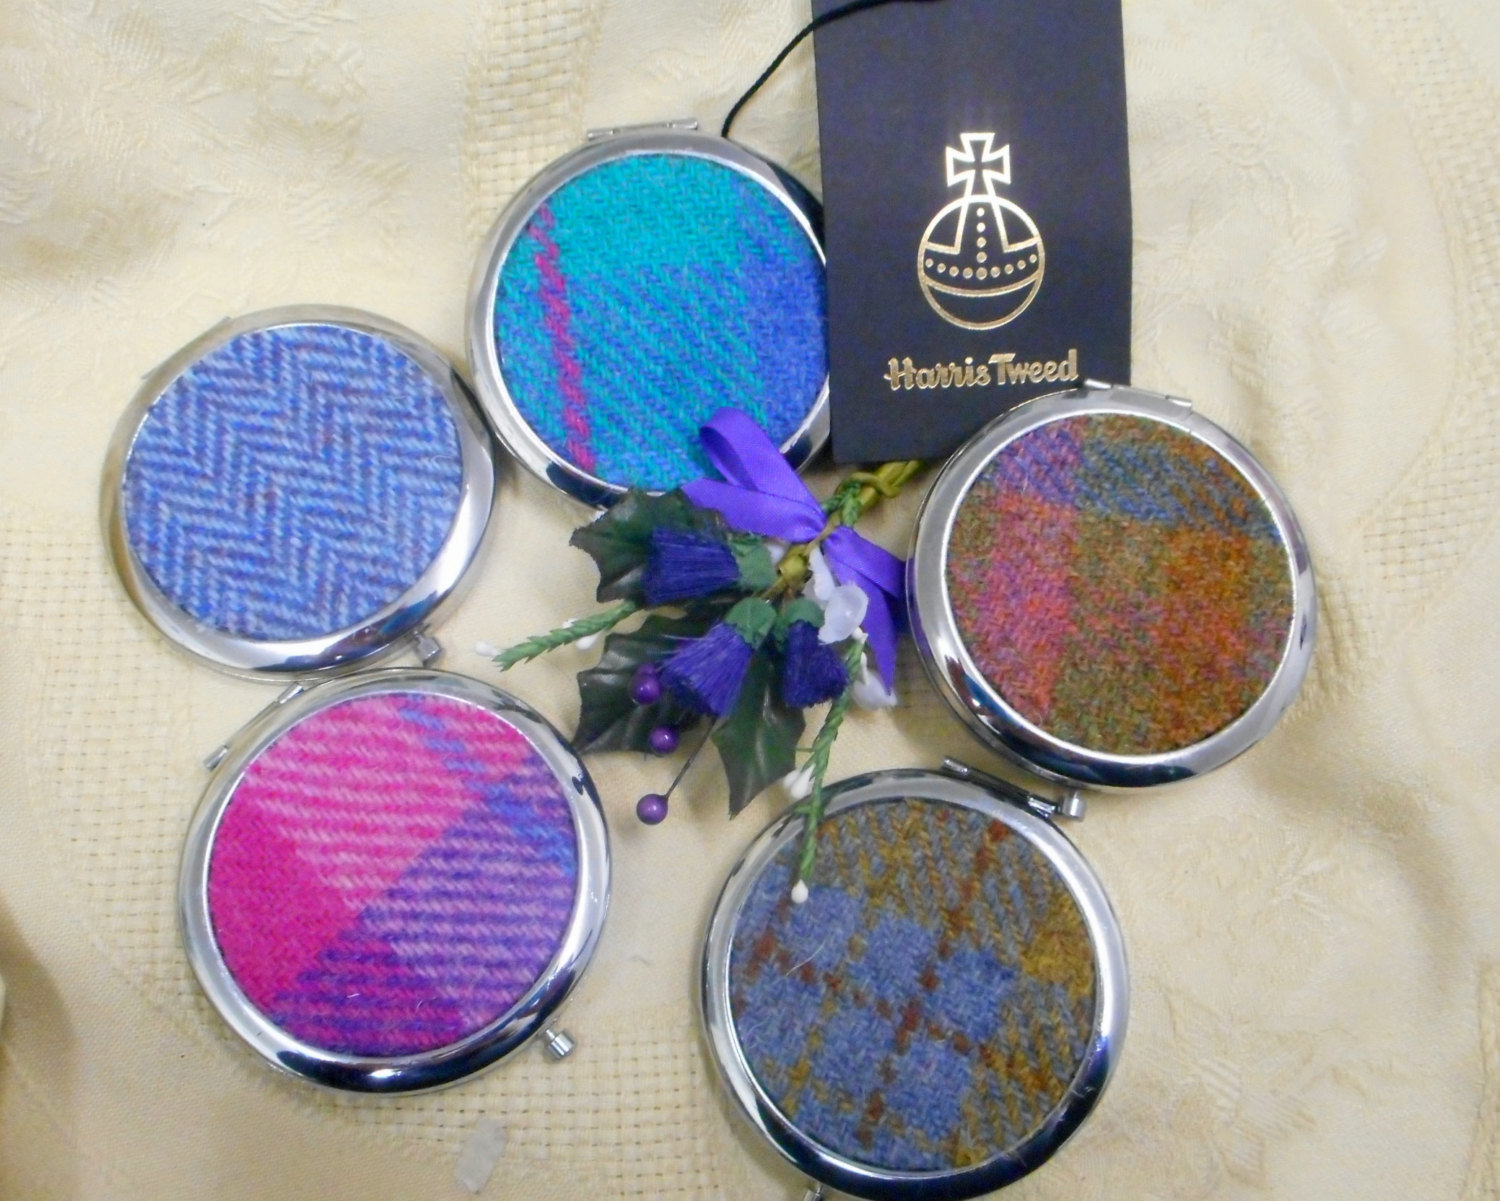 Cerise Pink Compact Mirror Kaona Harris Tweed, womens little gift for mother, sister, best friend ,  for handbag or pocket  made in Scotland by Tweed with a Twist